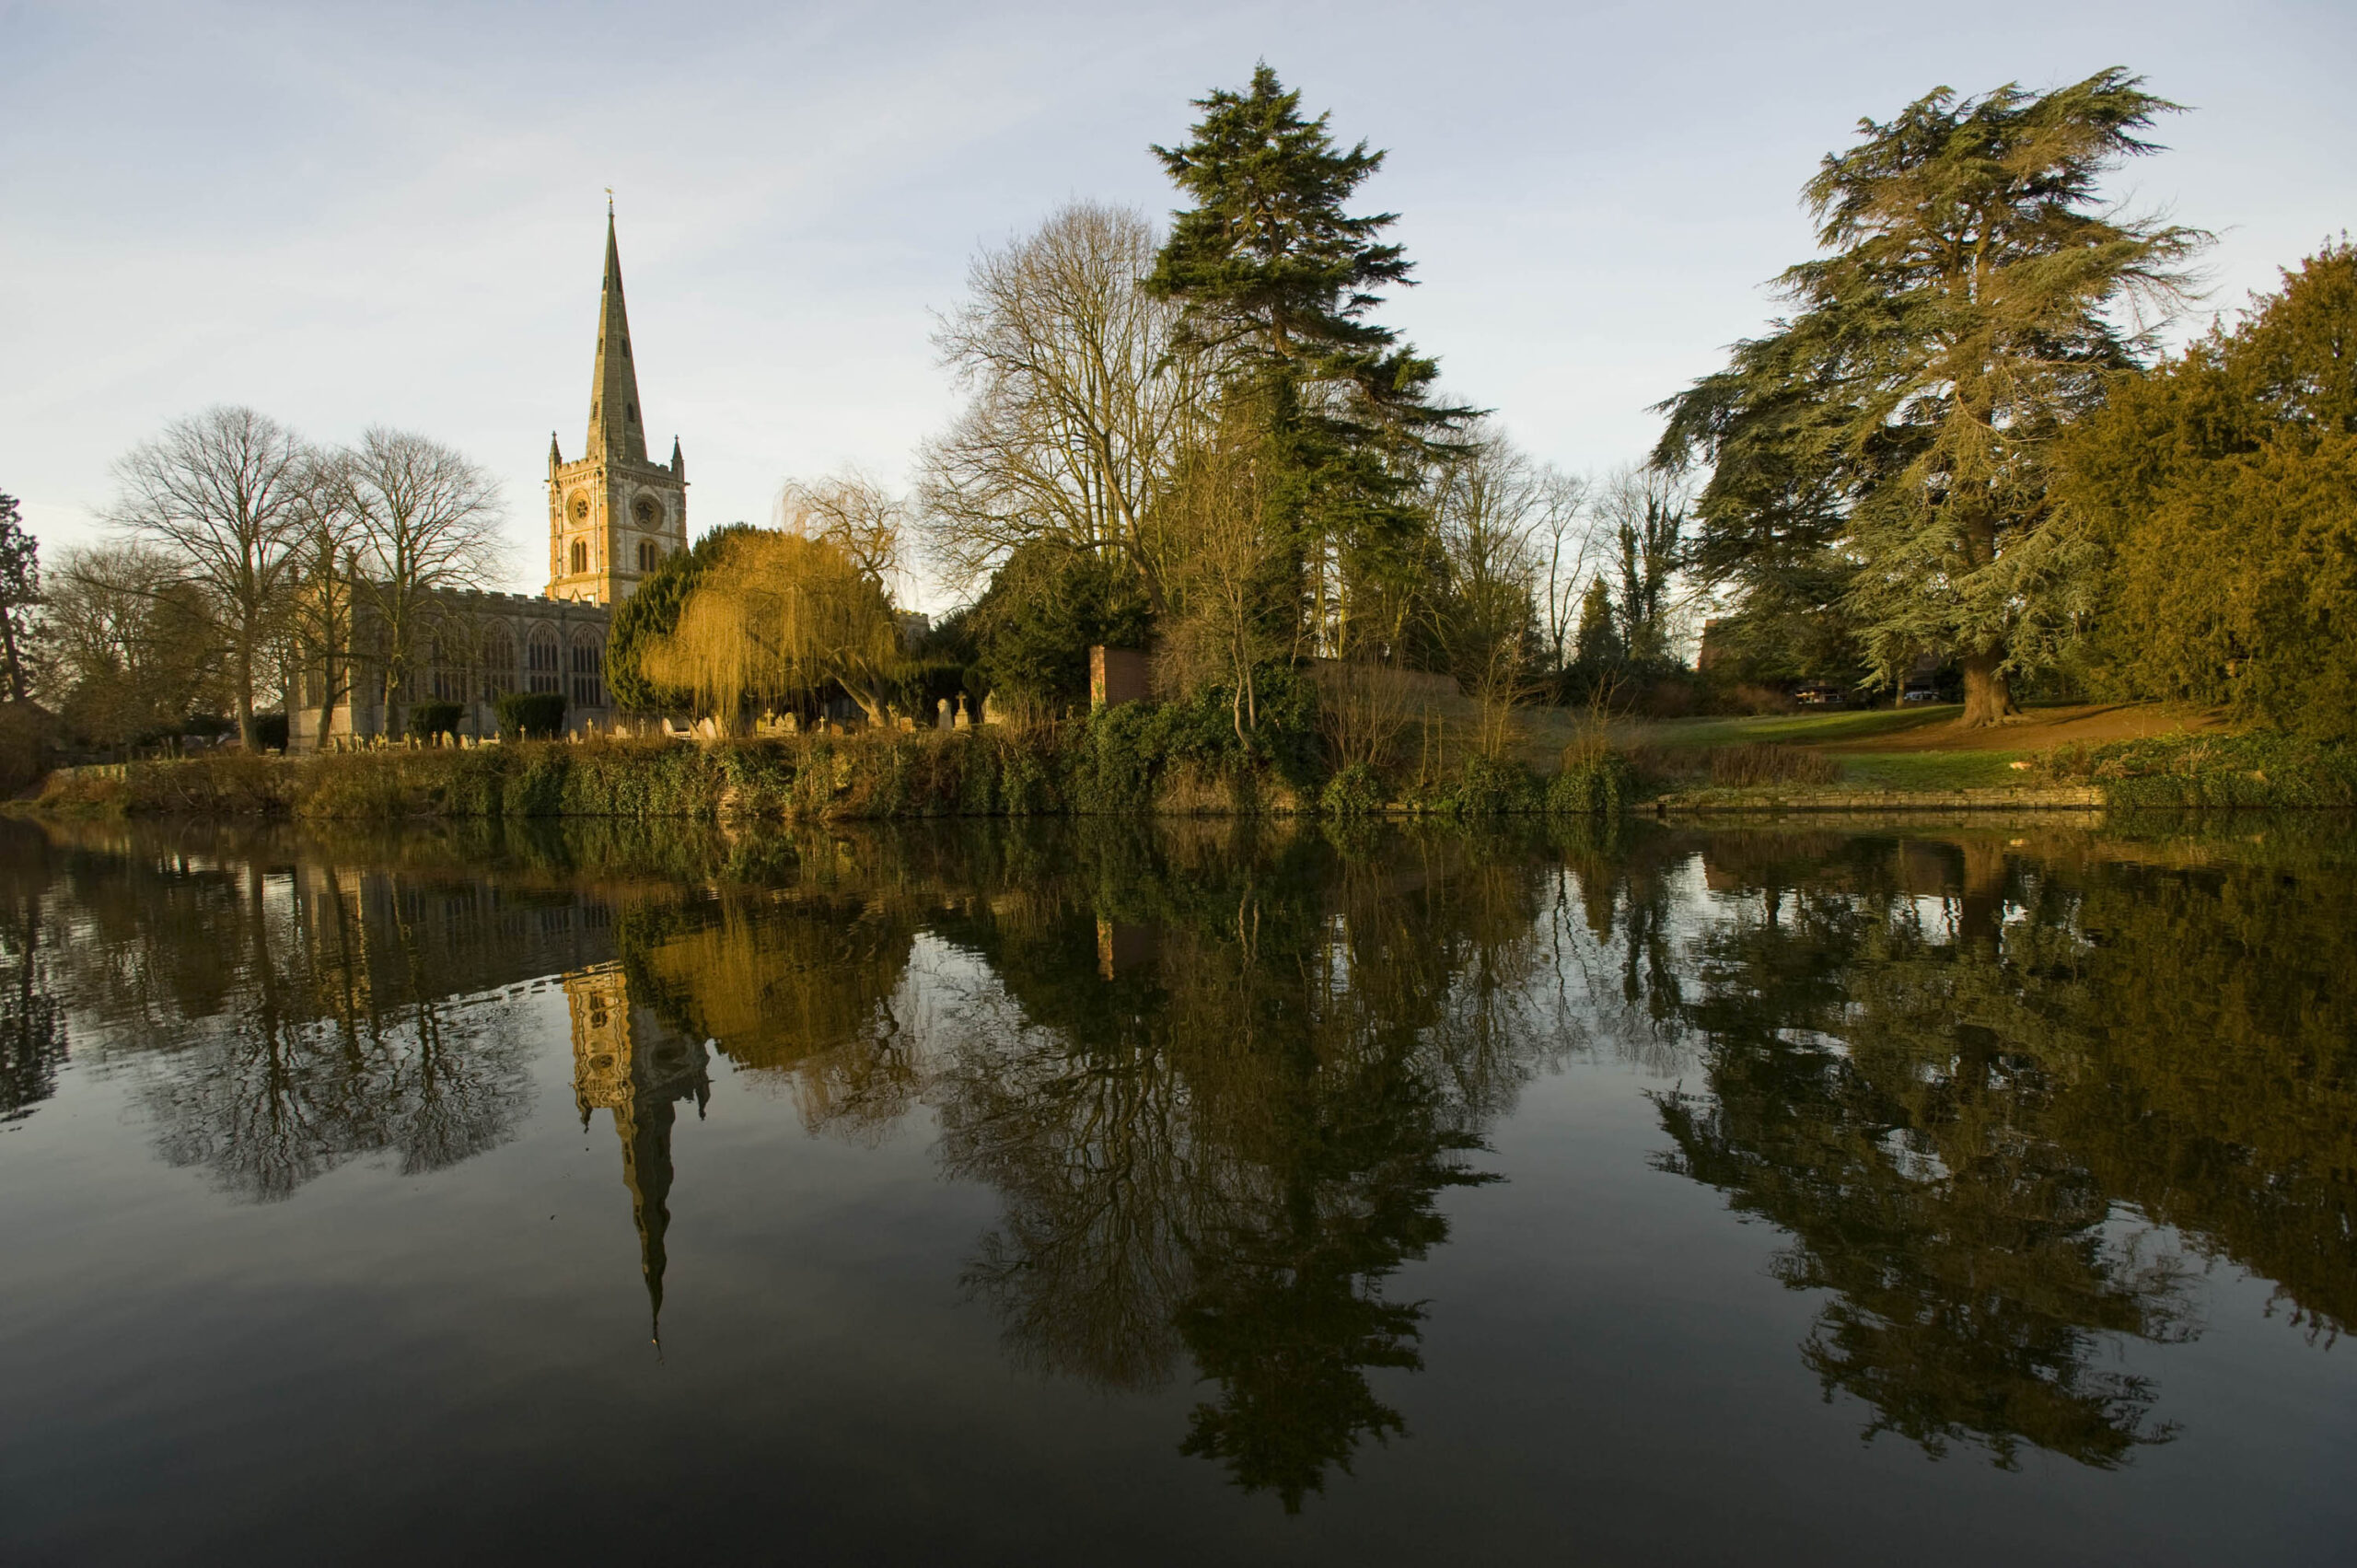 Autumn coloured image across river looking at the Church. landscape in water reflected